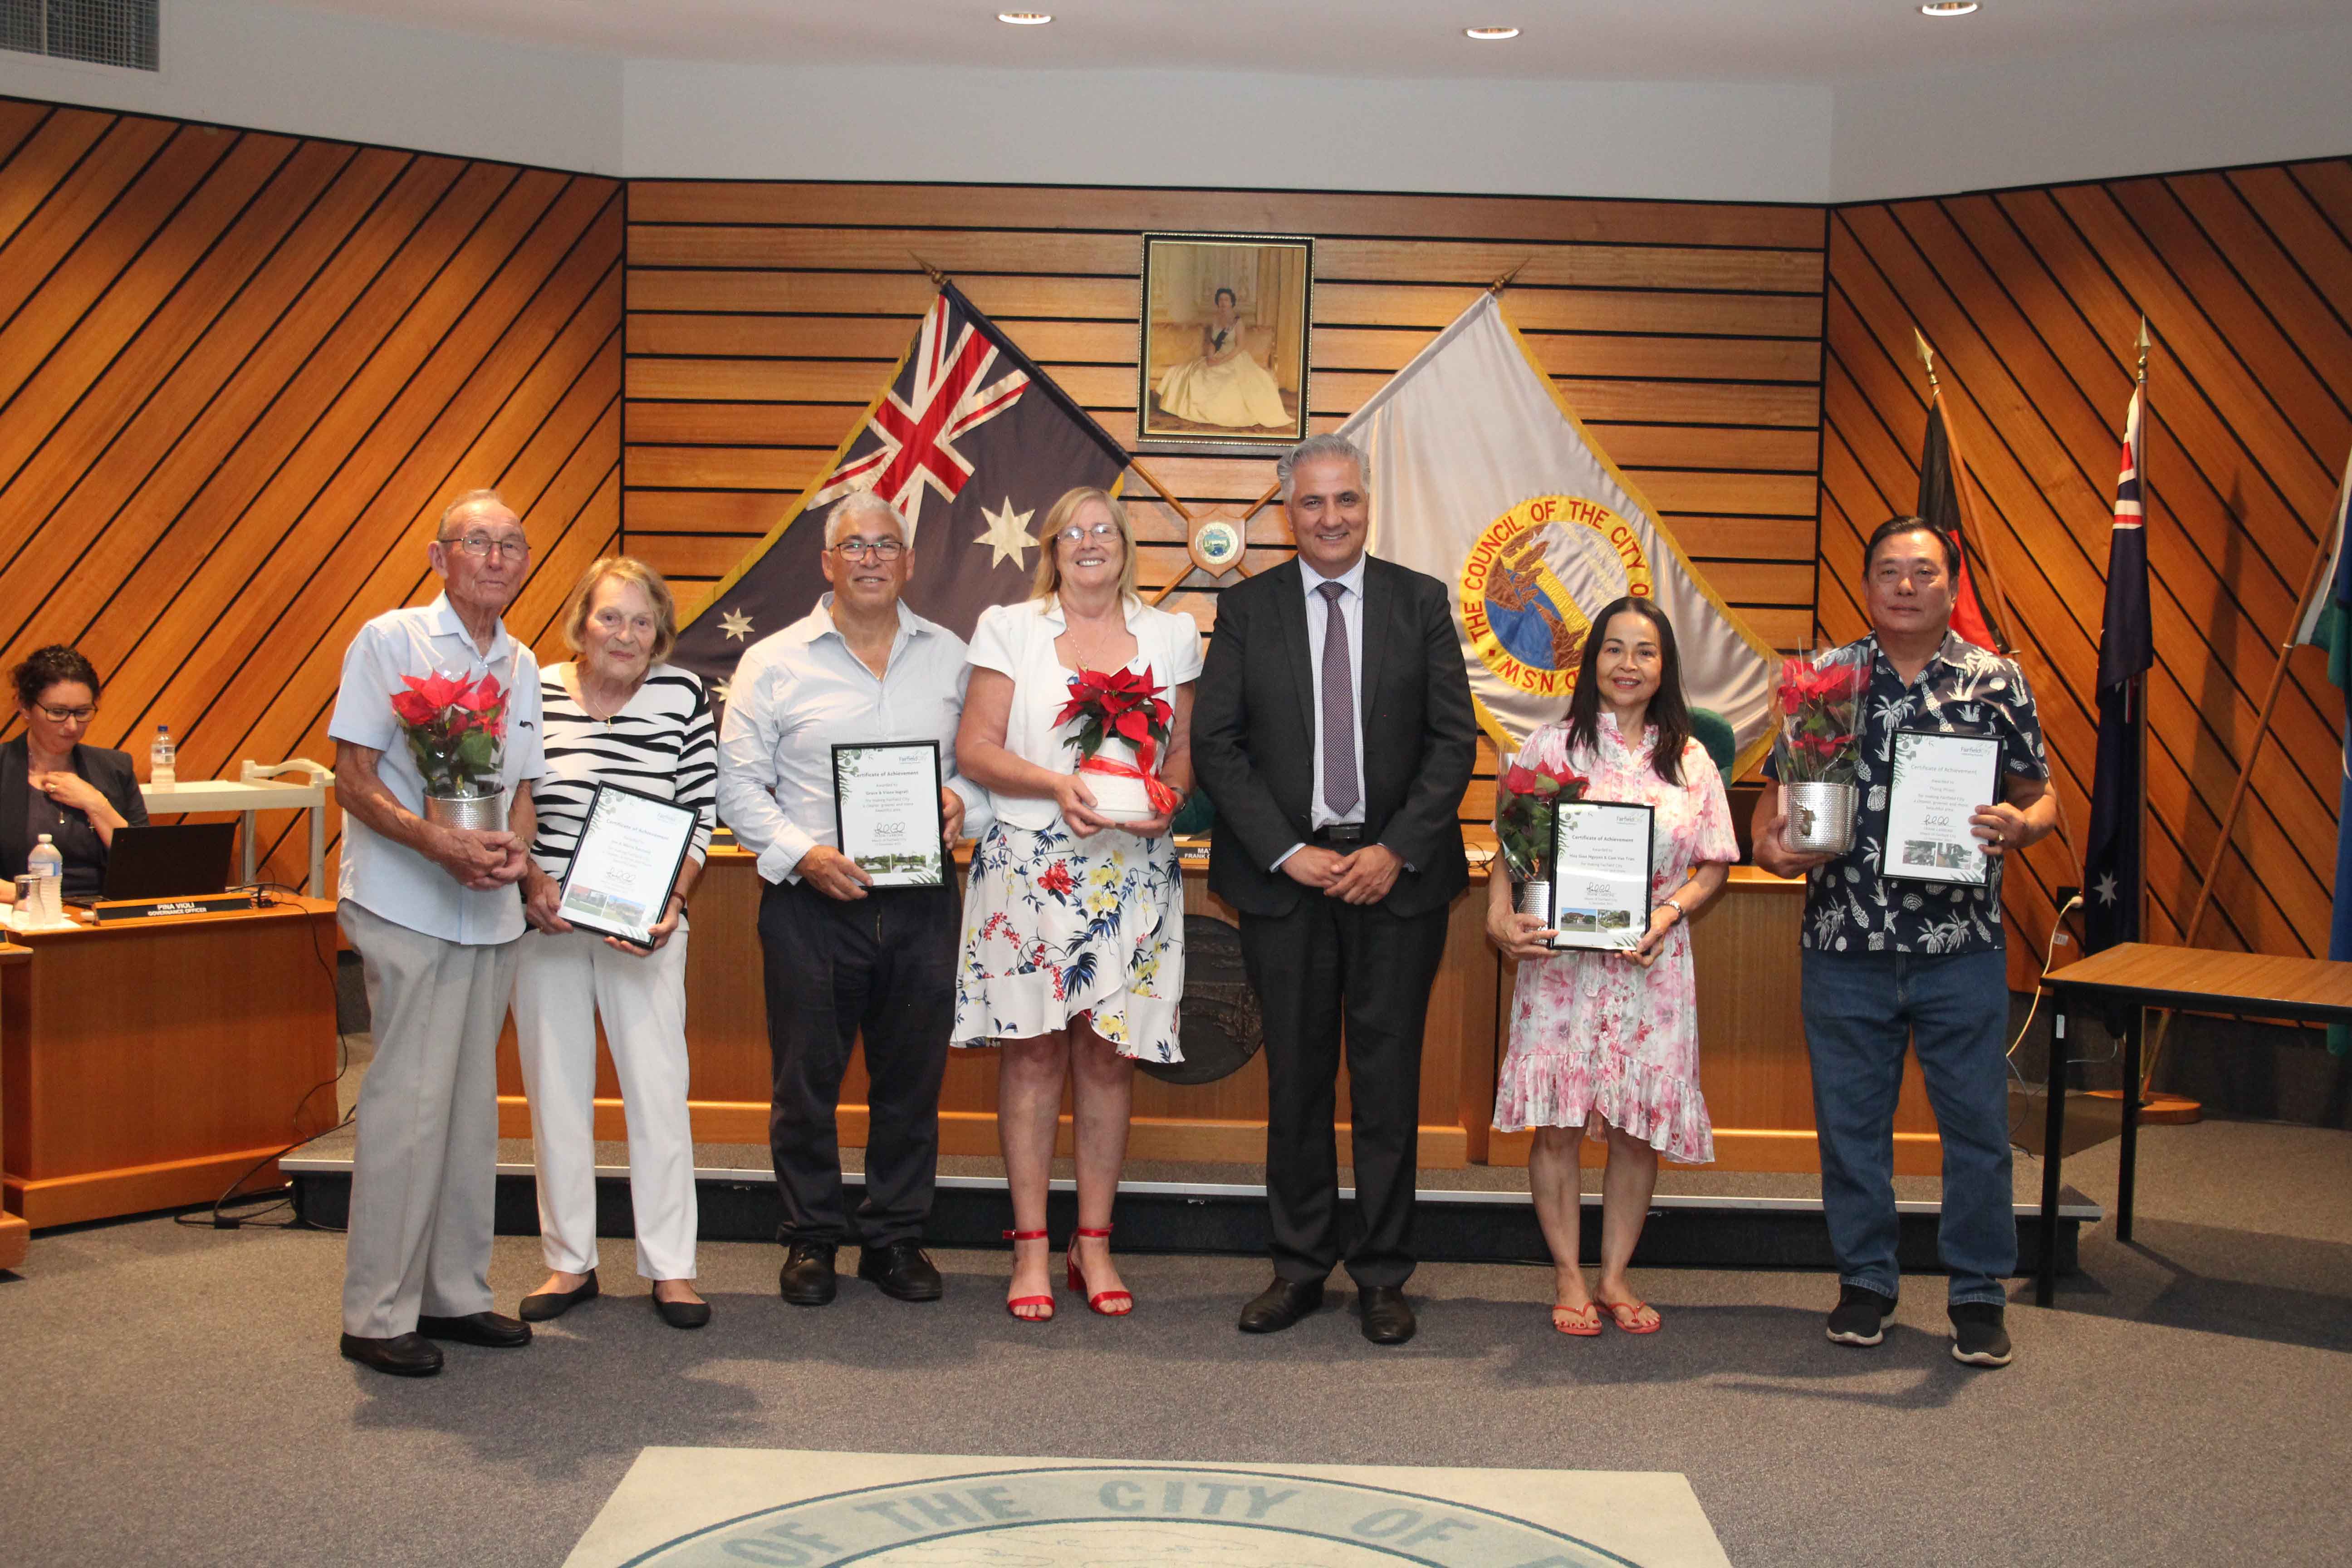 Group photo of the 2023 Garden of the Year winners and finalists with Mayor Frank Carbone